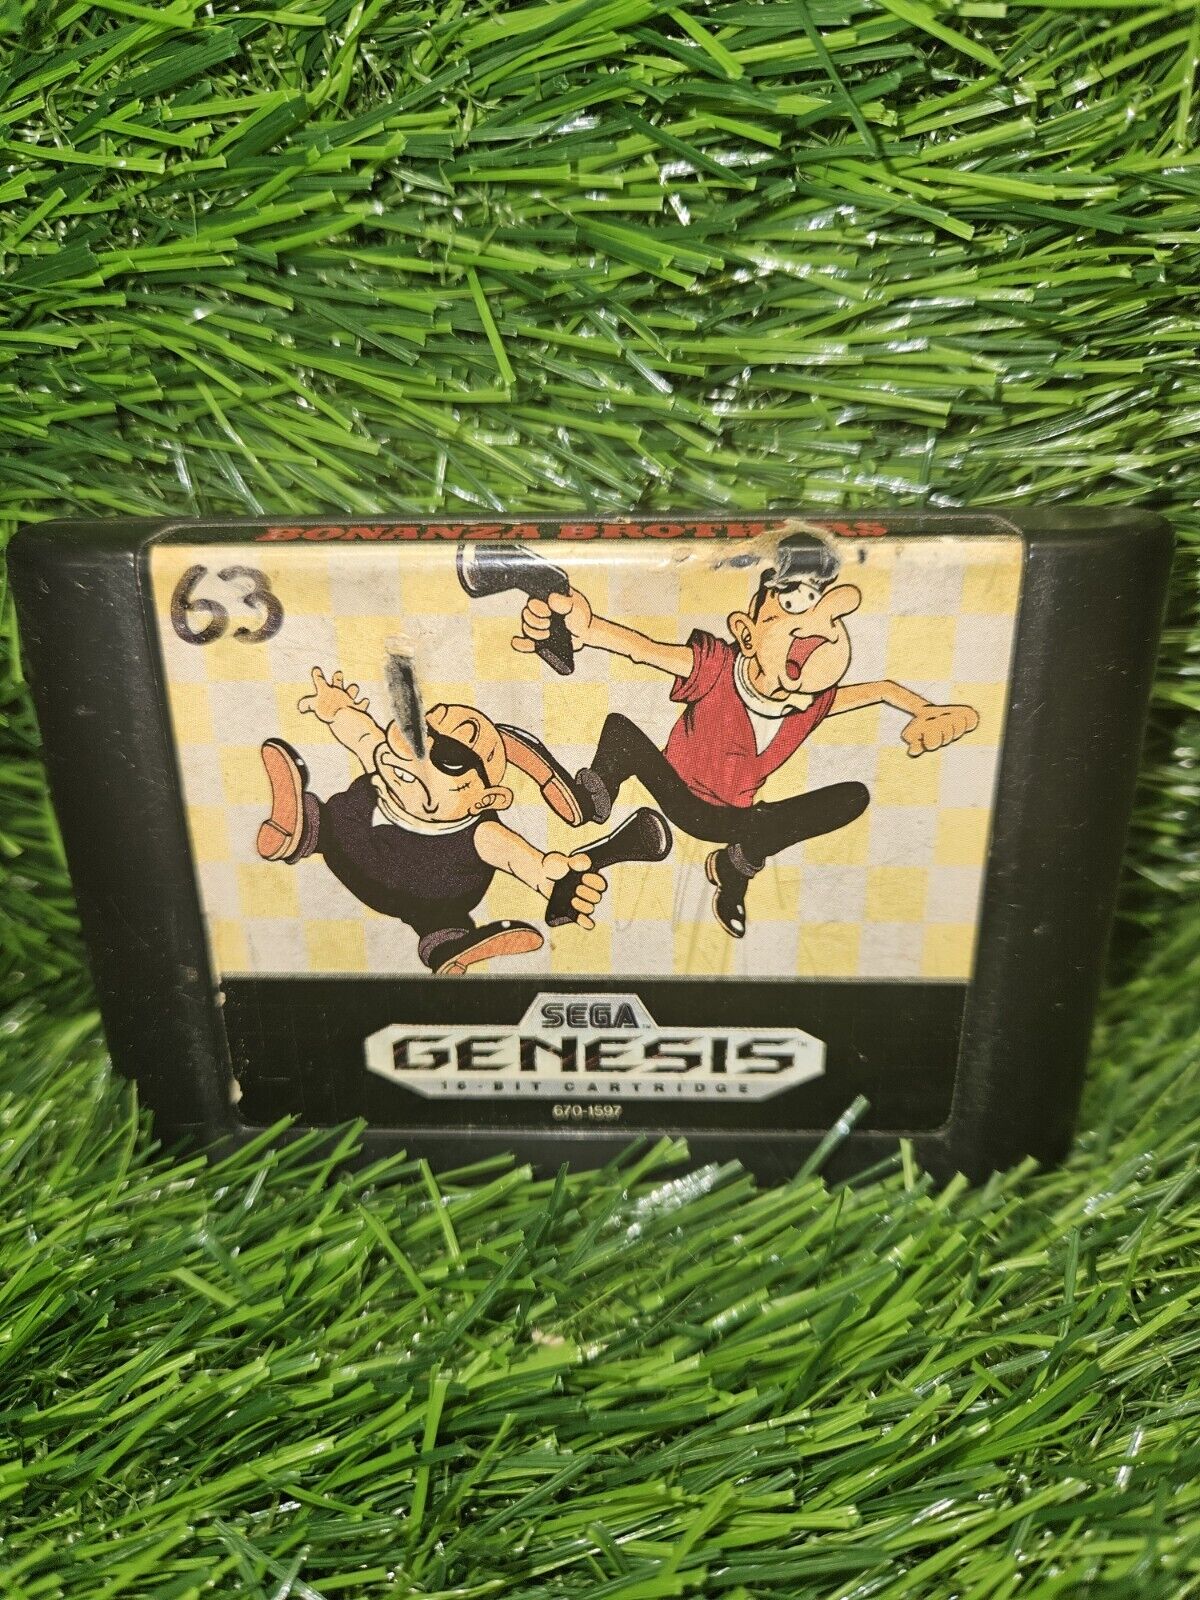 Bonanza Brothers [Bros] Sega Genesis 1991 - Cart Only Authentic Tested Read